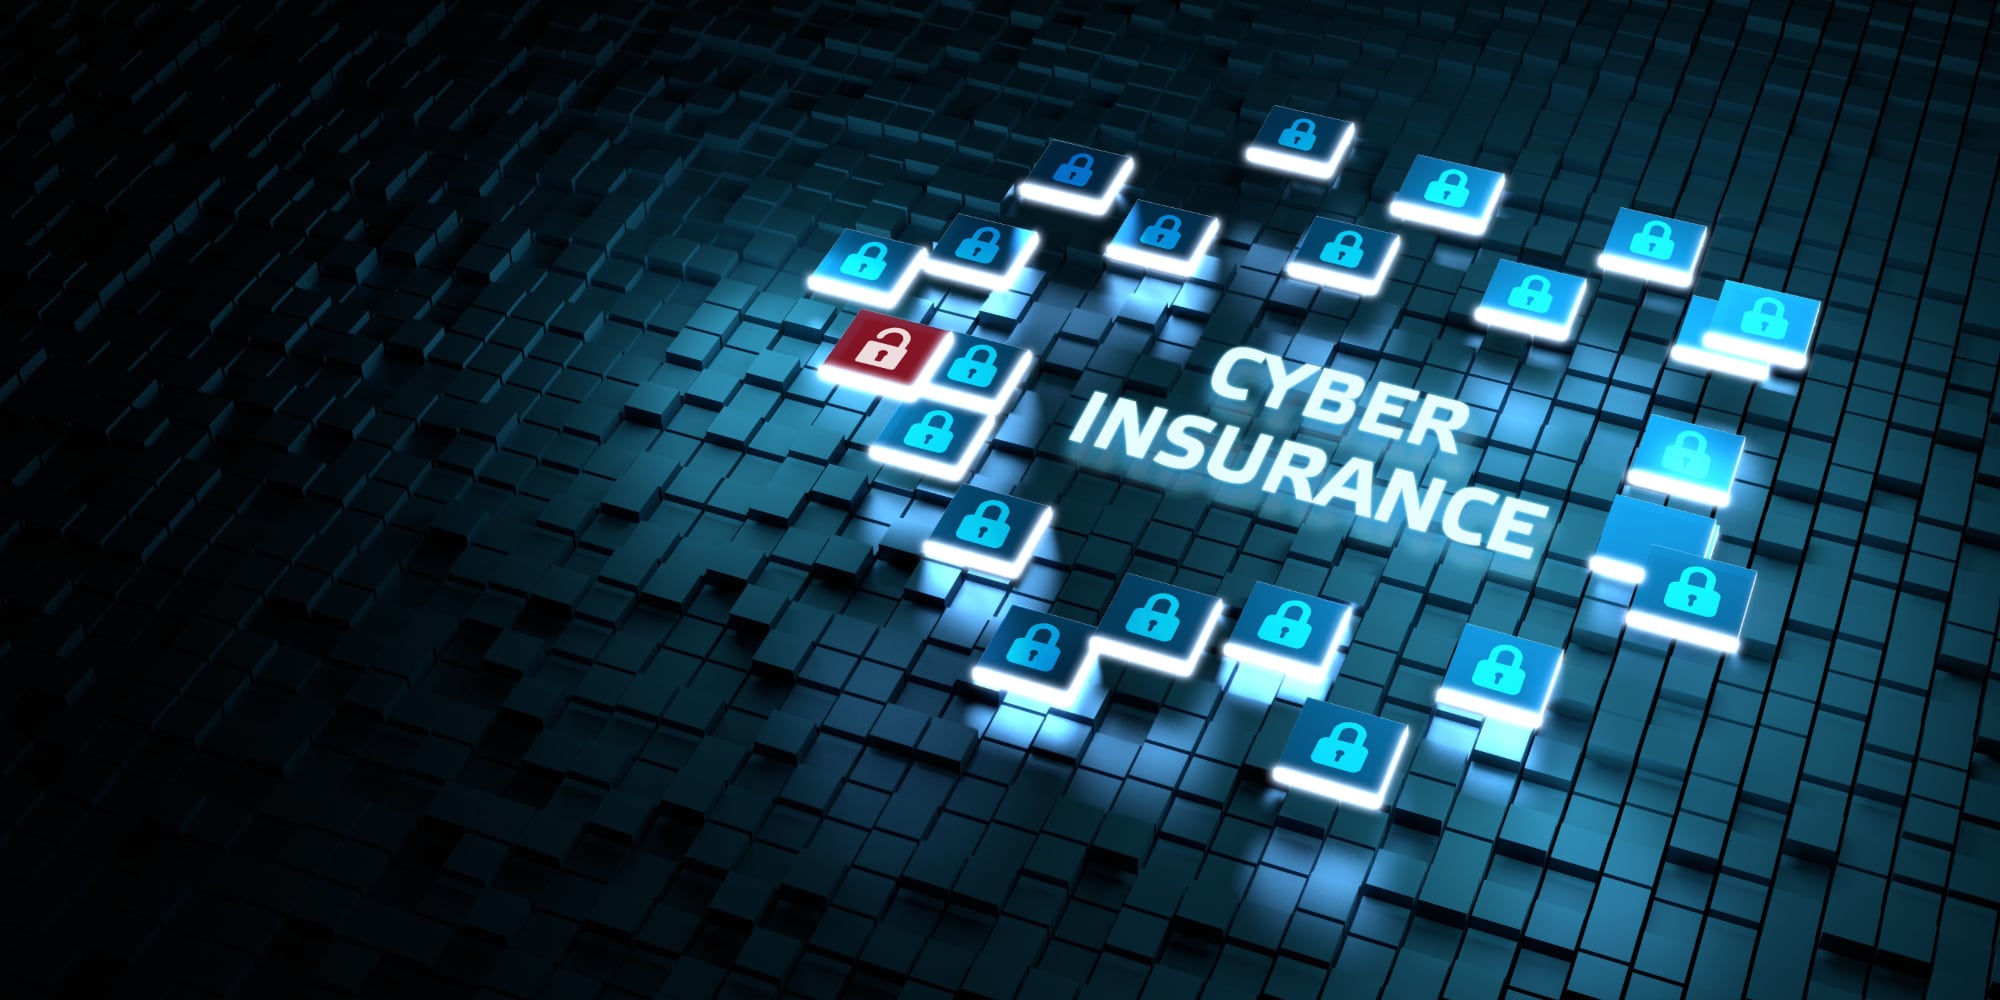 With Attacks on the Upswing, Cyber-Insurance Premiums Poised to Rise Too